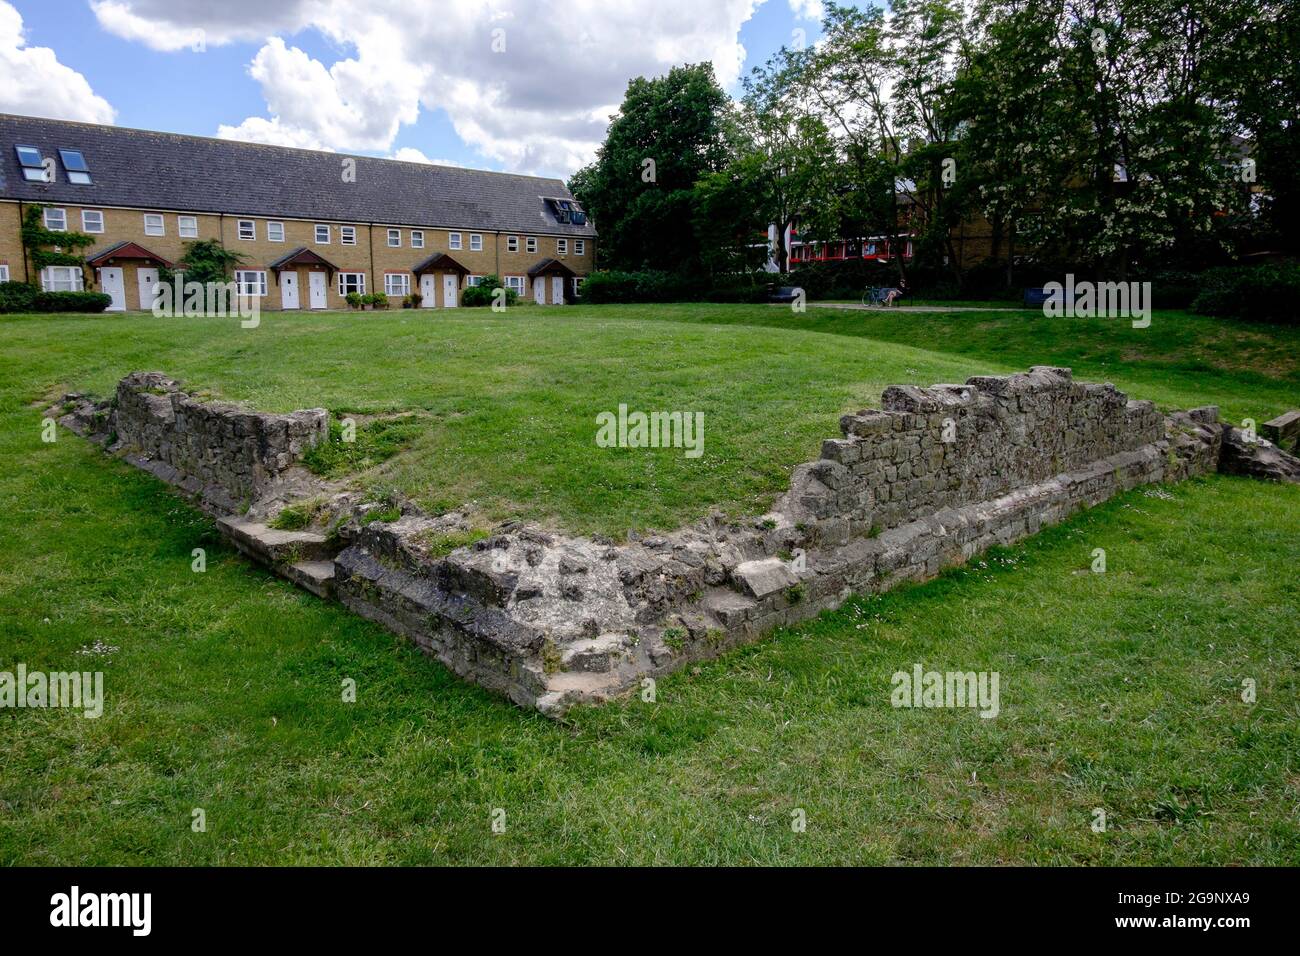 Ruins of King Edward III Manor House constructed around 1350, Rotherhithe, South London, UK. Stock Photo